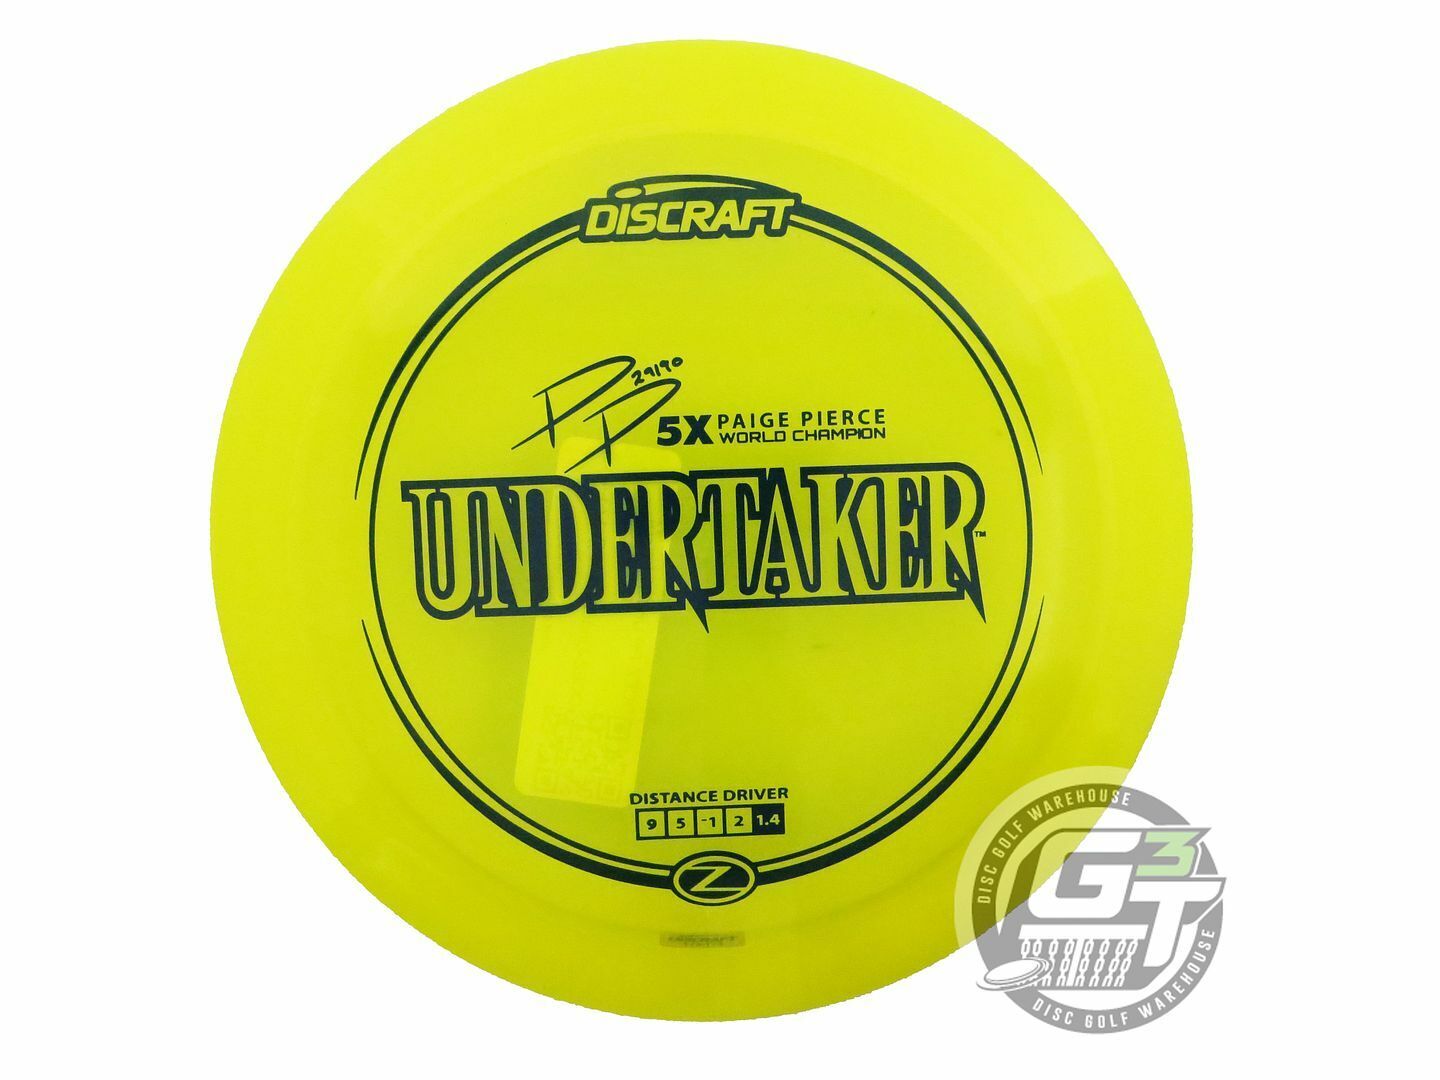 Discraft Elite Z Undertaker [Paige Pierce 5X] Distance Driver Golf Disc (Individually Listed)